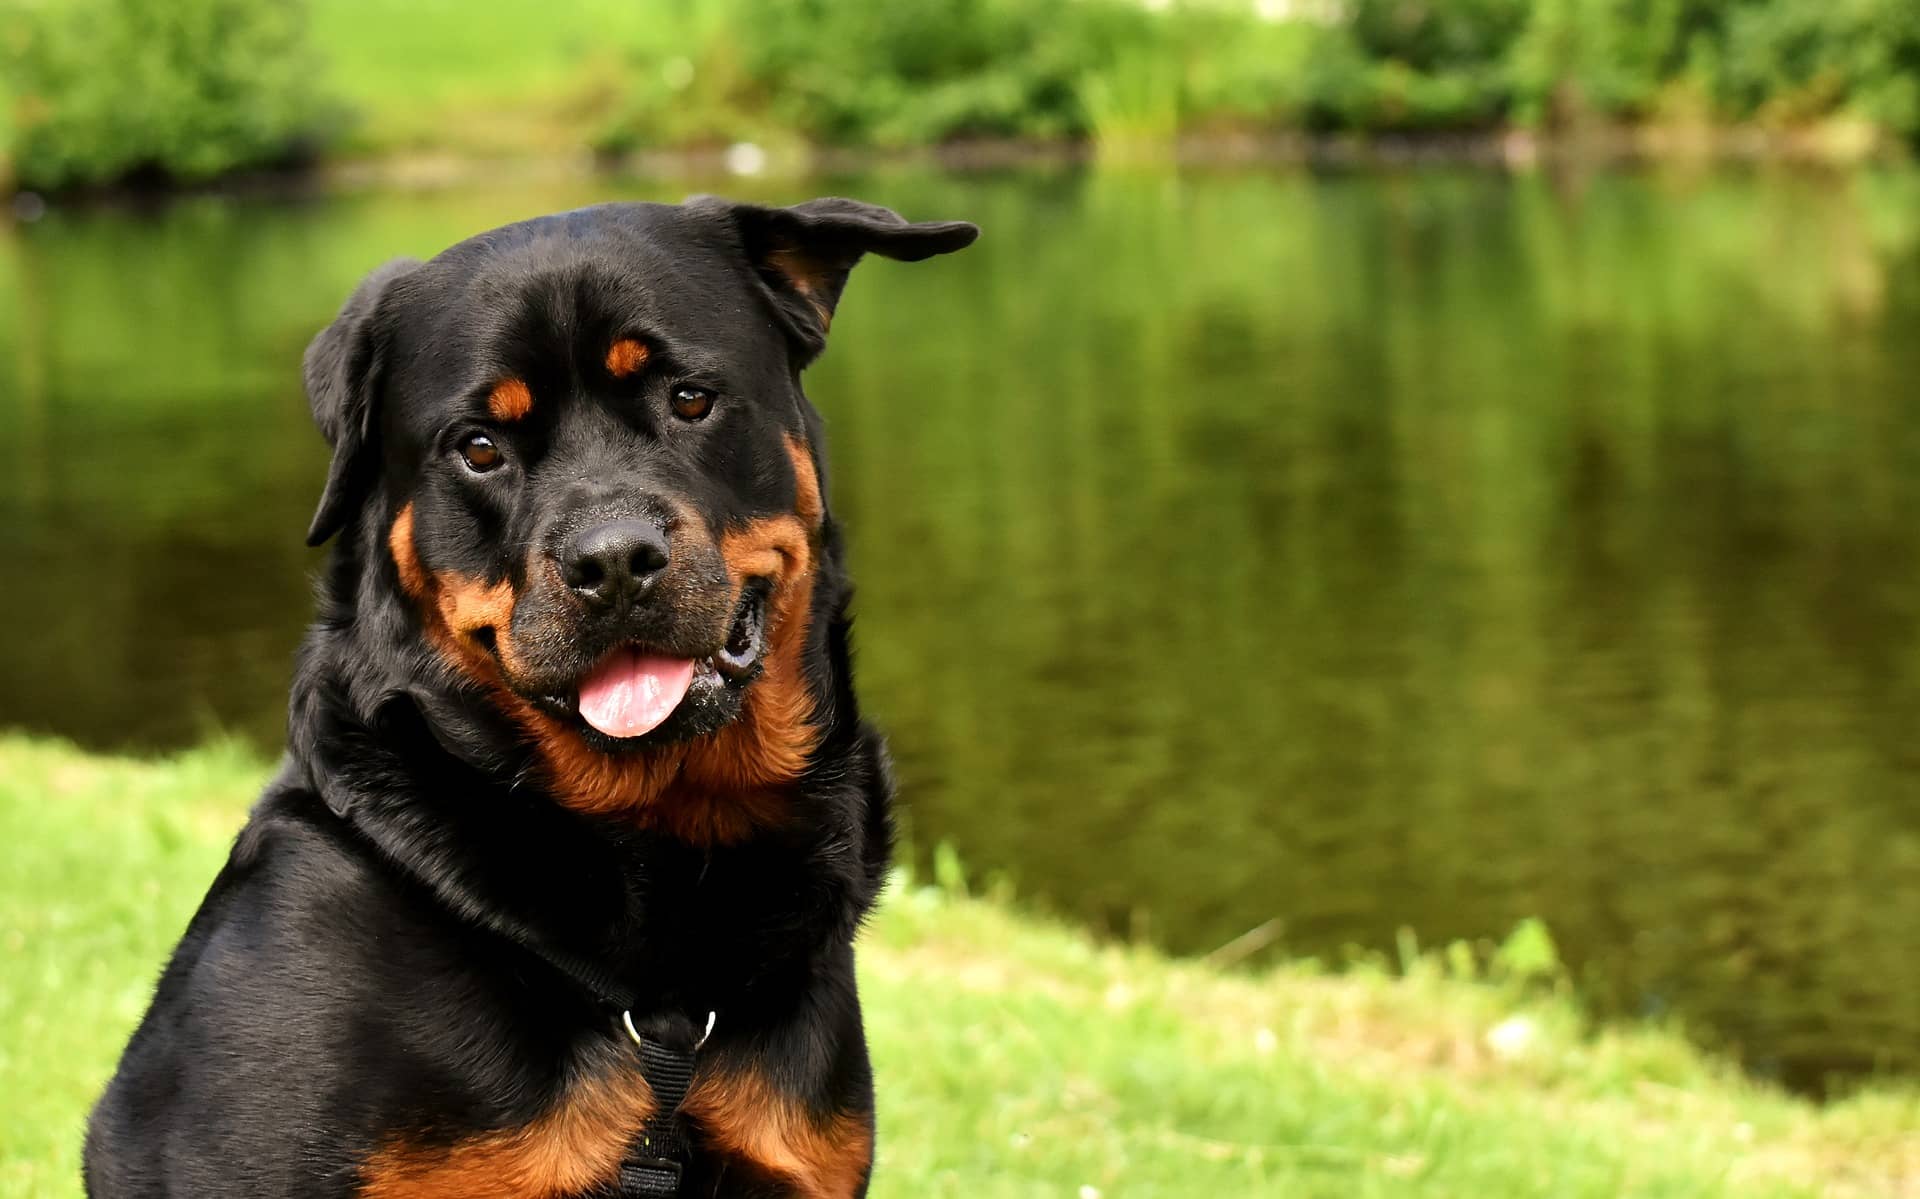 How to train a Rottweiler